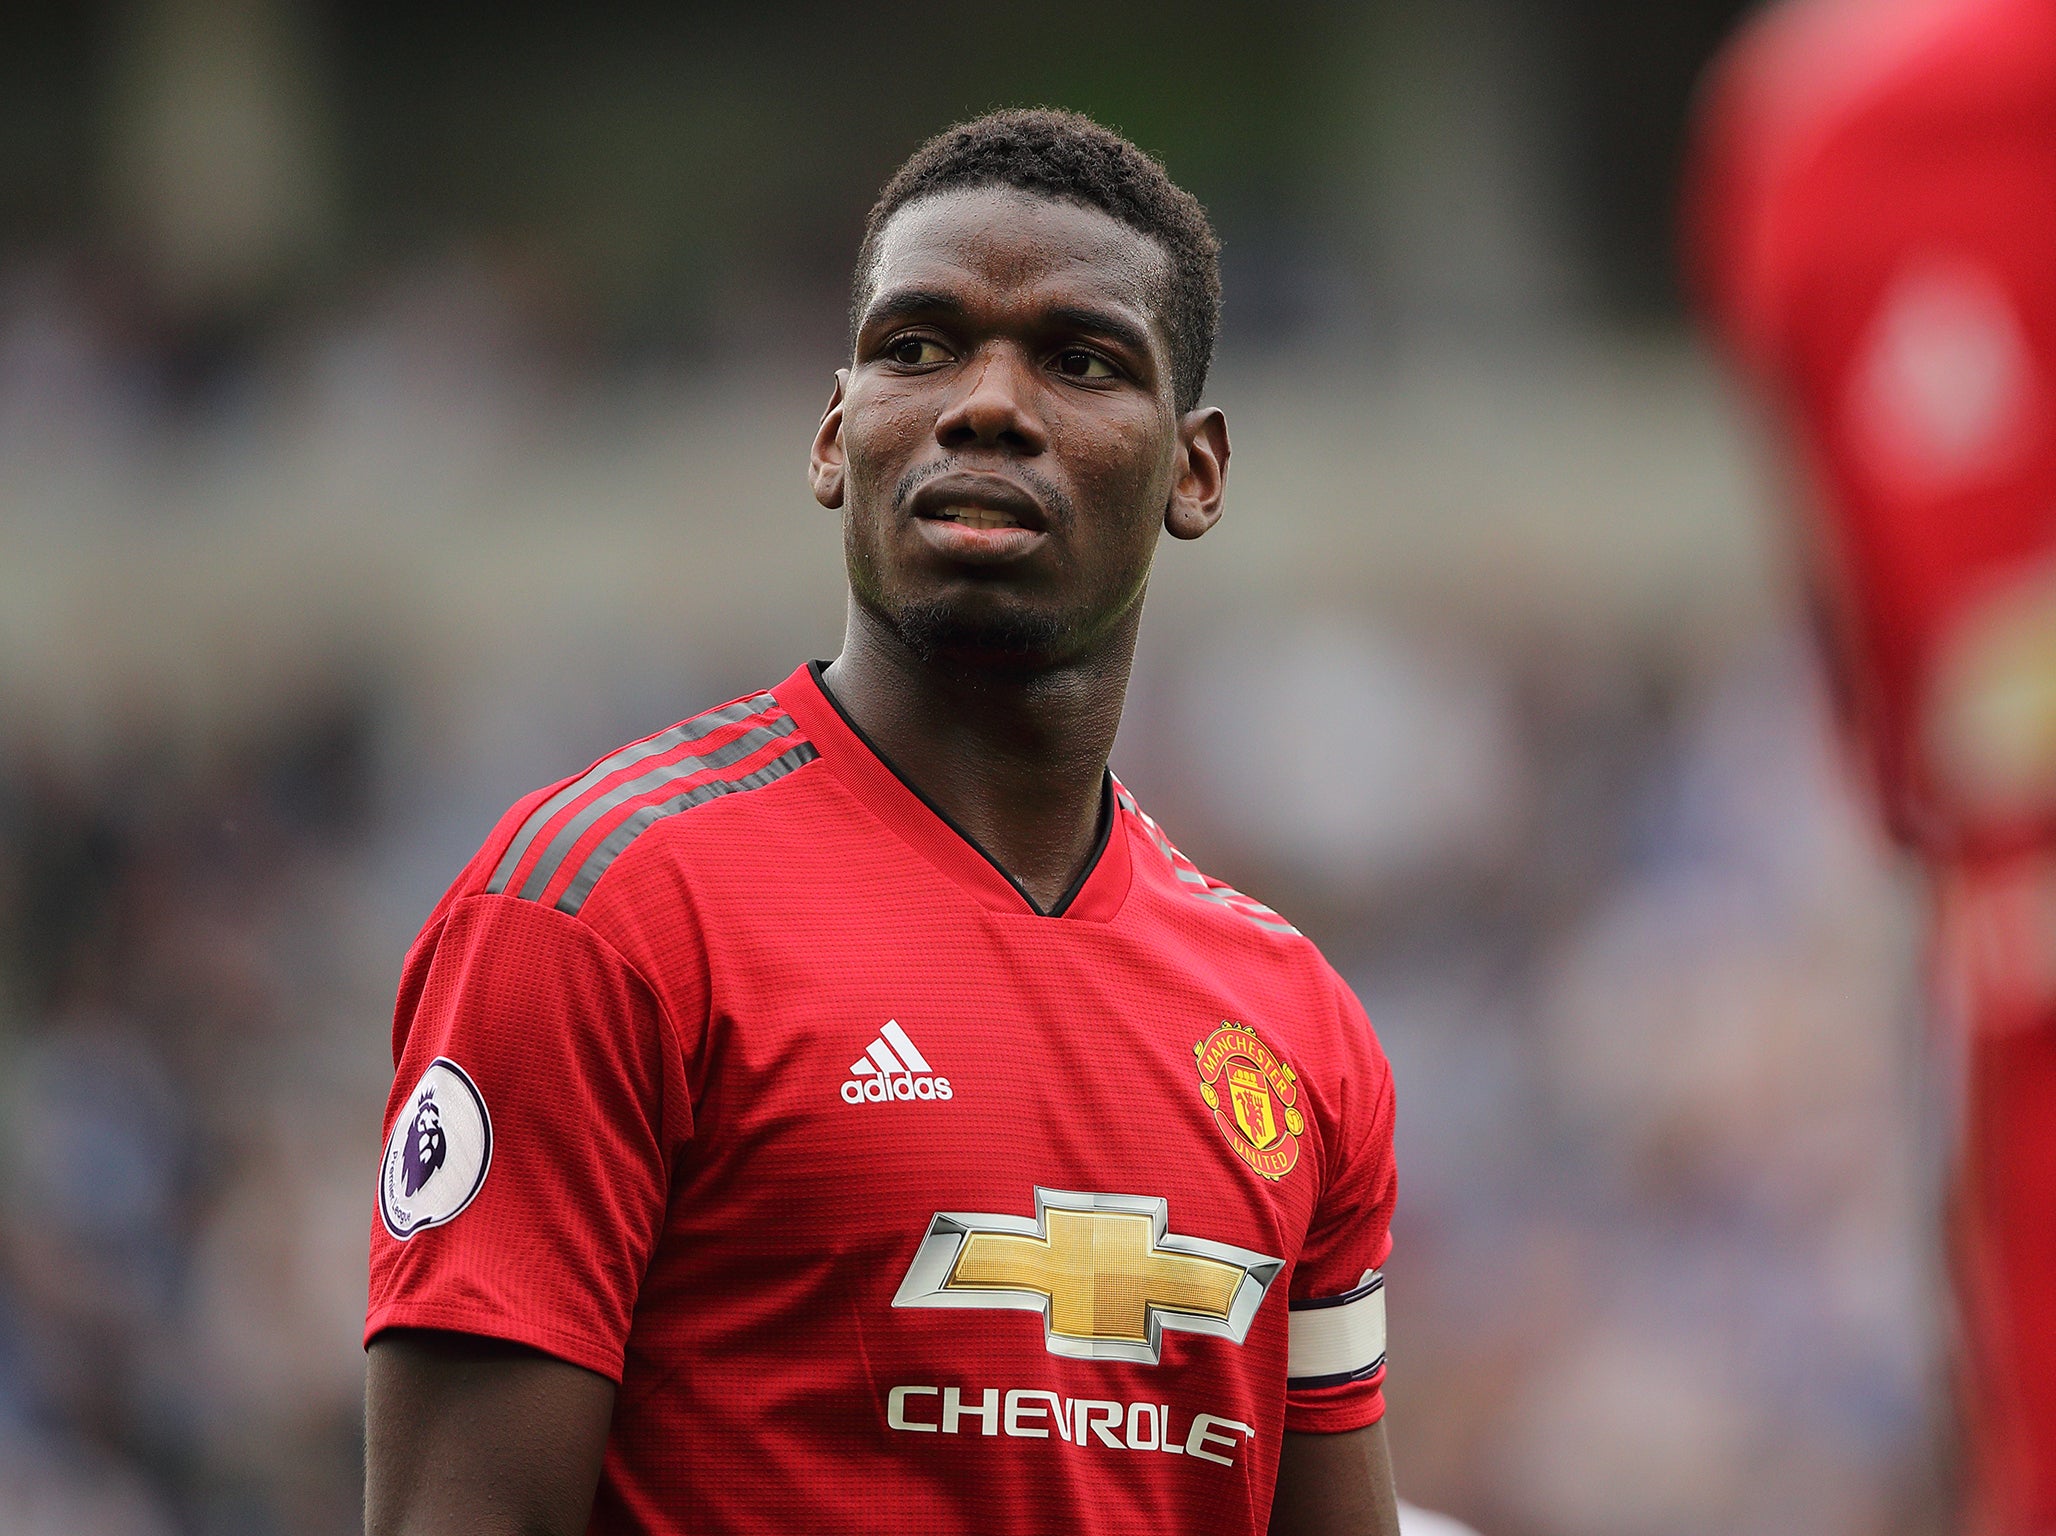 Mourinho refused to discuss Pogba's comments